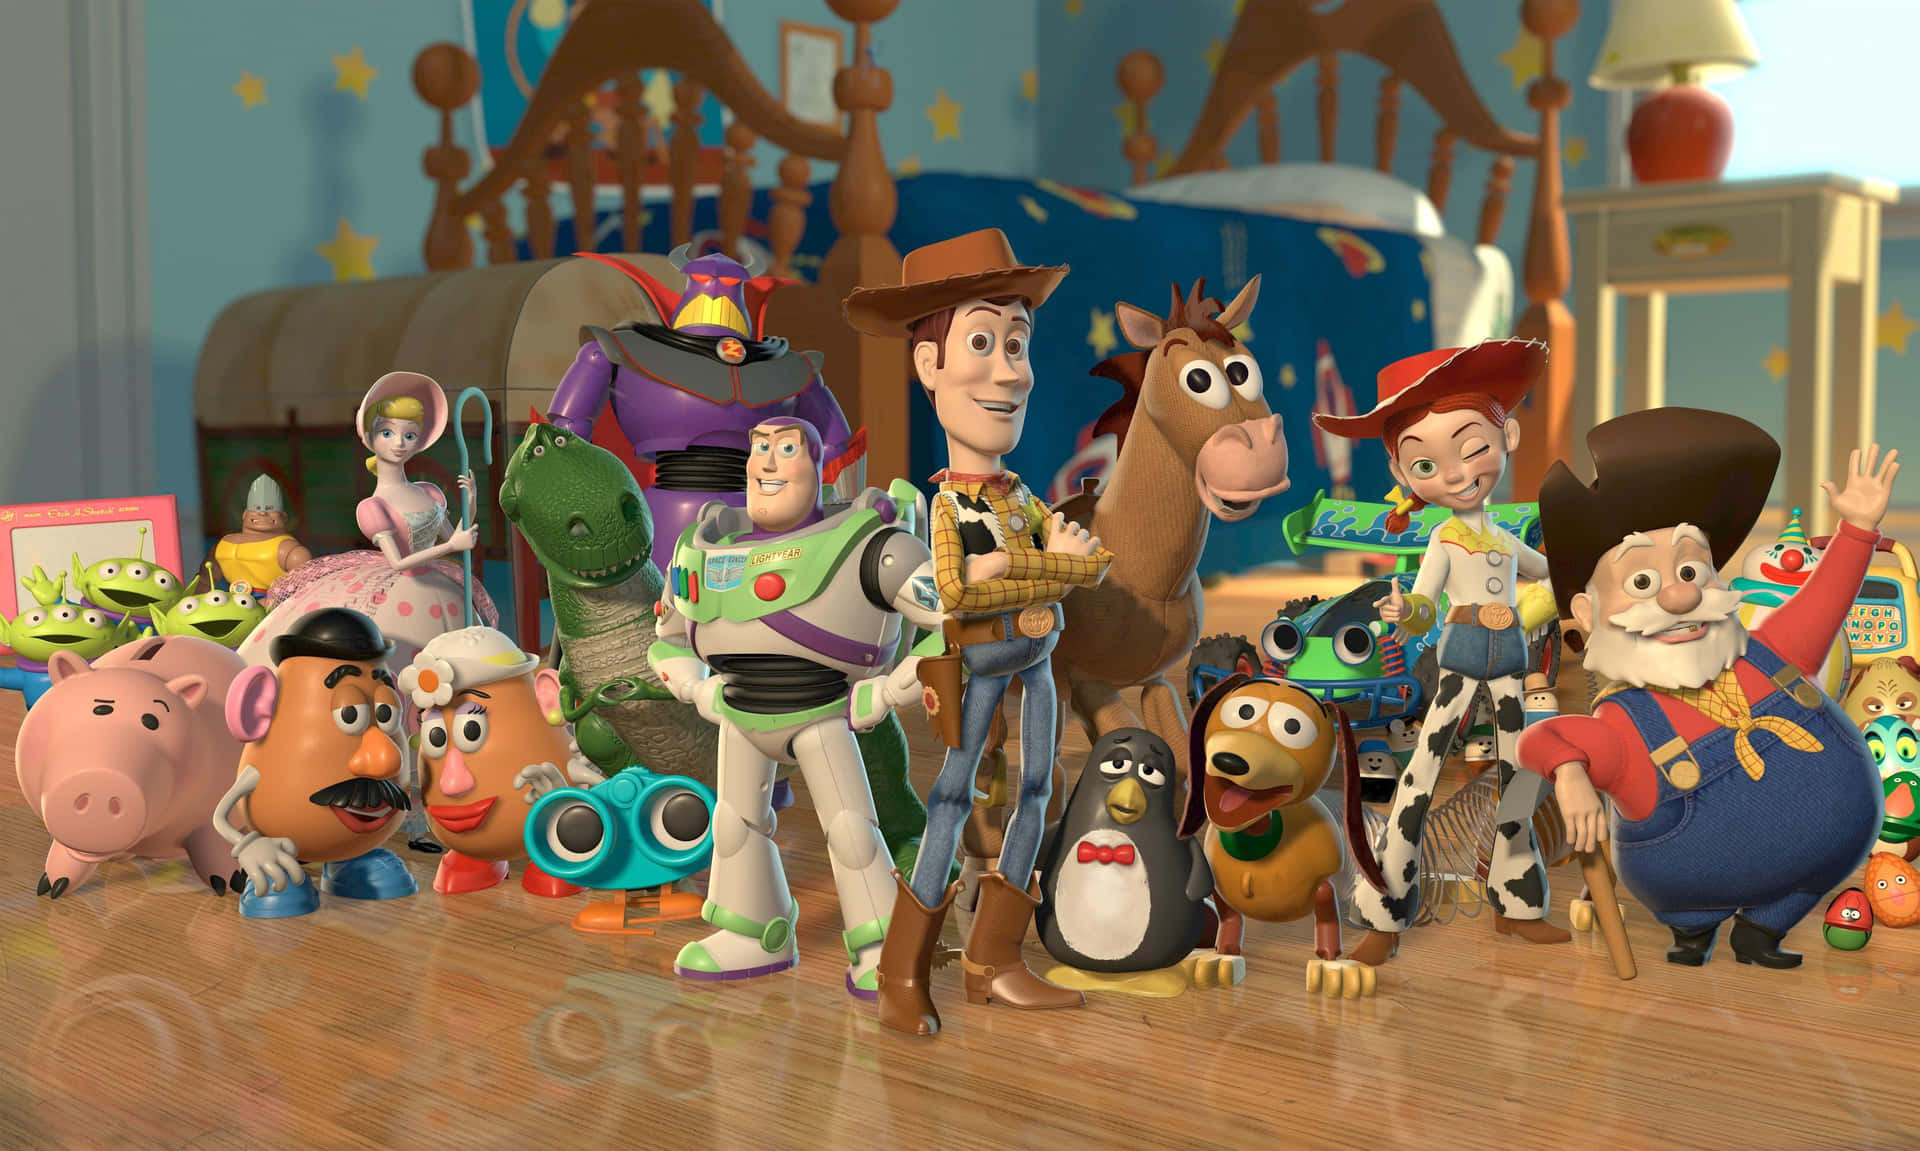 Witness the unending adventures of Woody, Buzz and the gang in Toy Story!